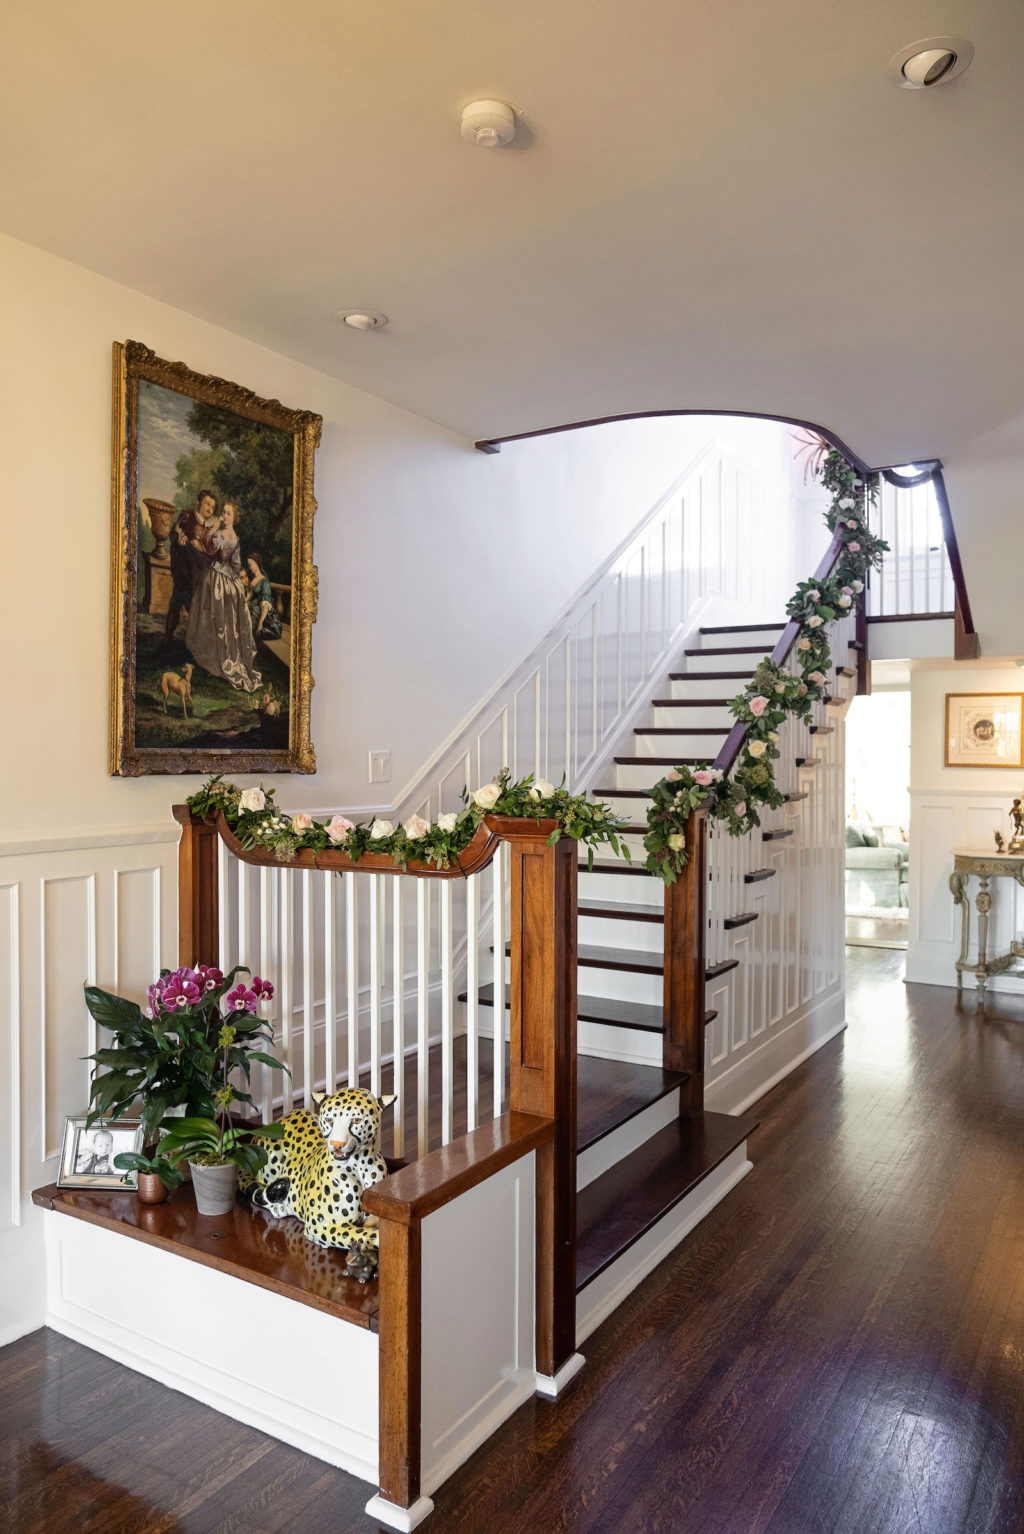 At-Home Wedding Staircase with Floral Garland | Intimate Private Residence Wedding Venue | South Tampa Wedding Florist Bride N Blooms Wholesale Design